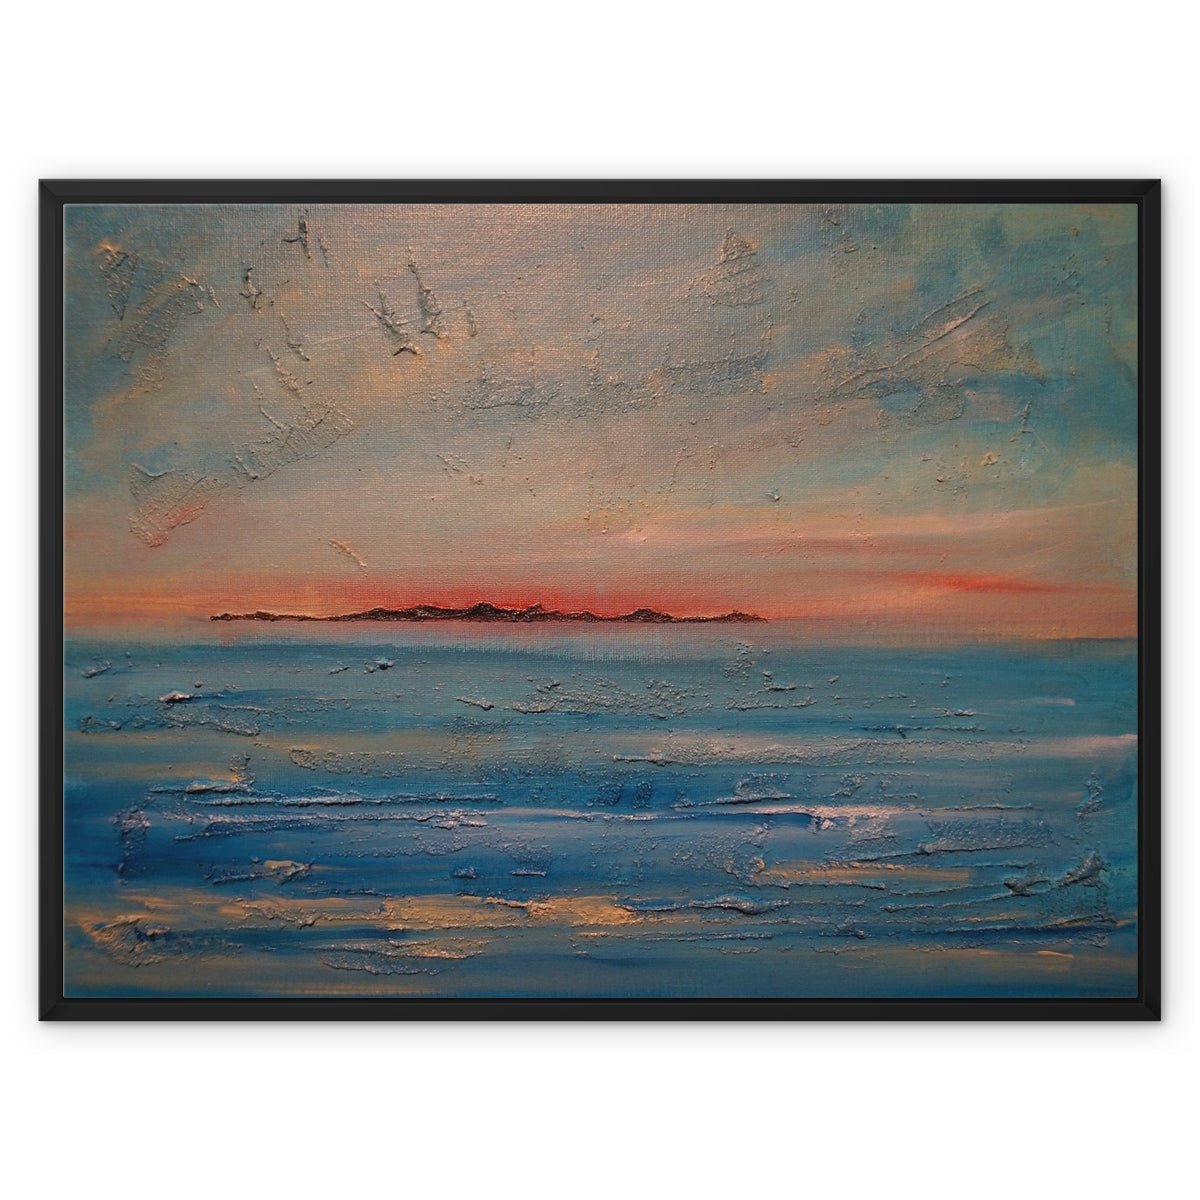 Gigha Sunset Painting | Framed Canvas From Scotland-Floating Framed Canvas Prints-Hebridean Islands Art Gallery-32"x24"-Black Frame-Paintings, Prints, Homeware, Art Gifts From Scotland By Scottish Artist Kevin Hunter